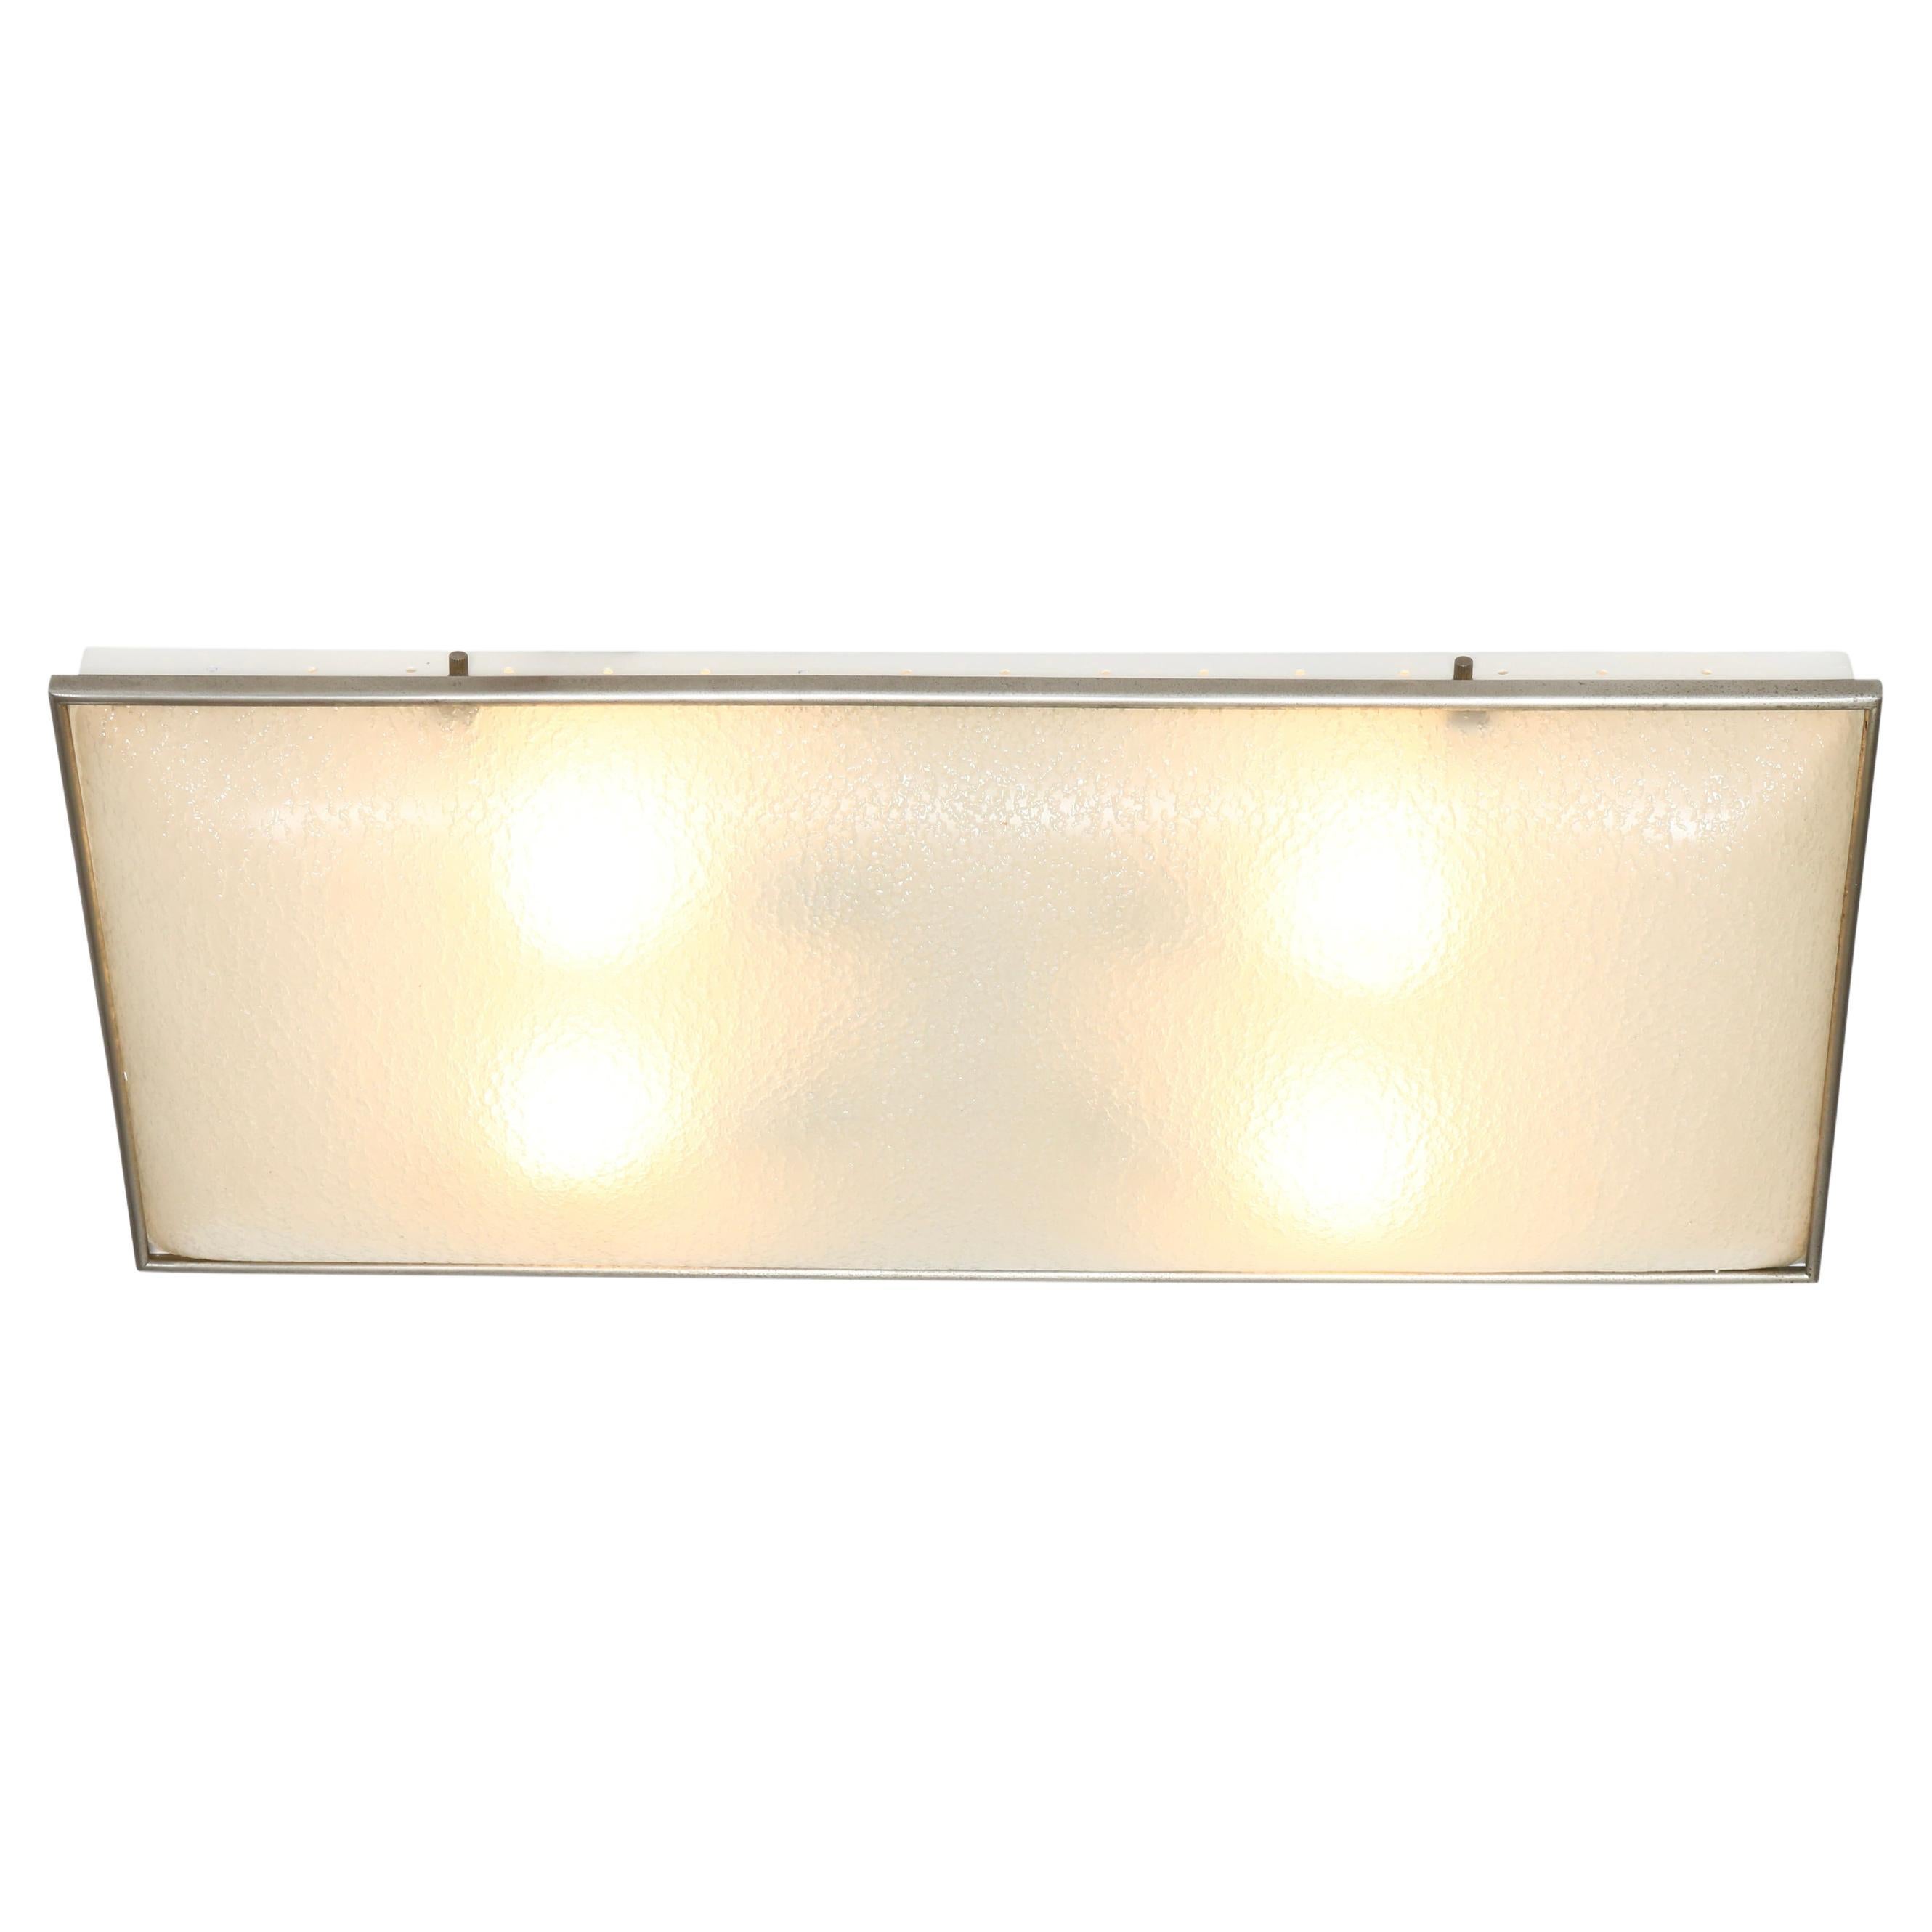 Fontana Arte attributed ceiling or wall light.
Textured glass, nickel plated metal, enameled metal.
Designed and manufactured in Italy, 1960s
Takes 4 medium base bulbs.
Rewired for US.

We take pride in bringing vintage fixtures to their full glory